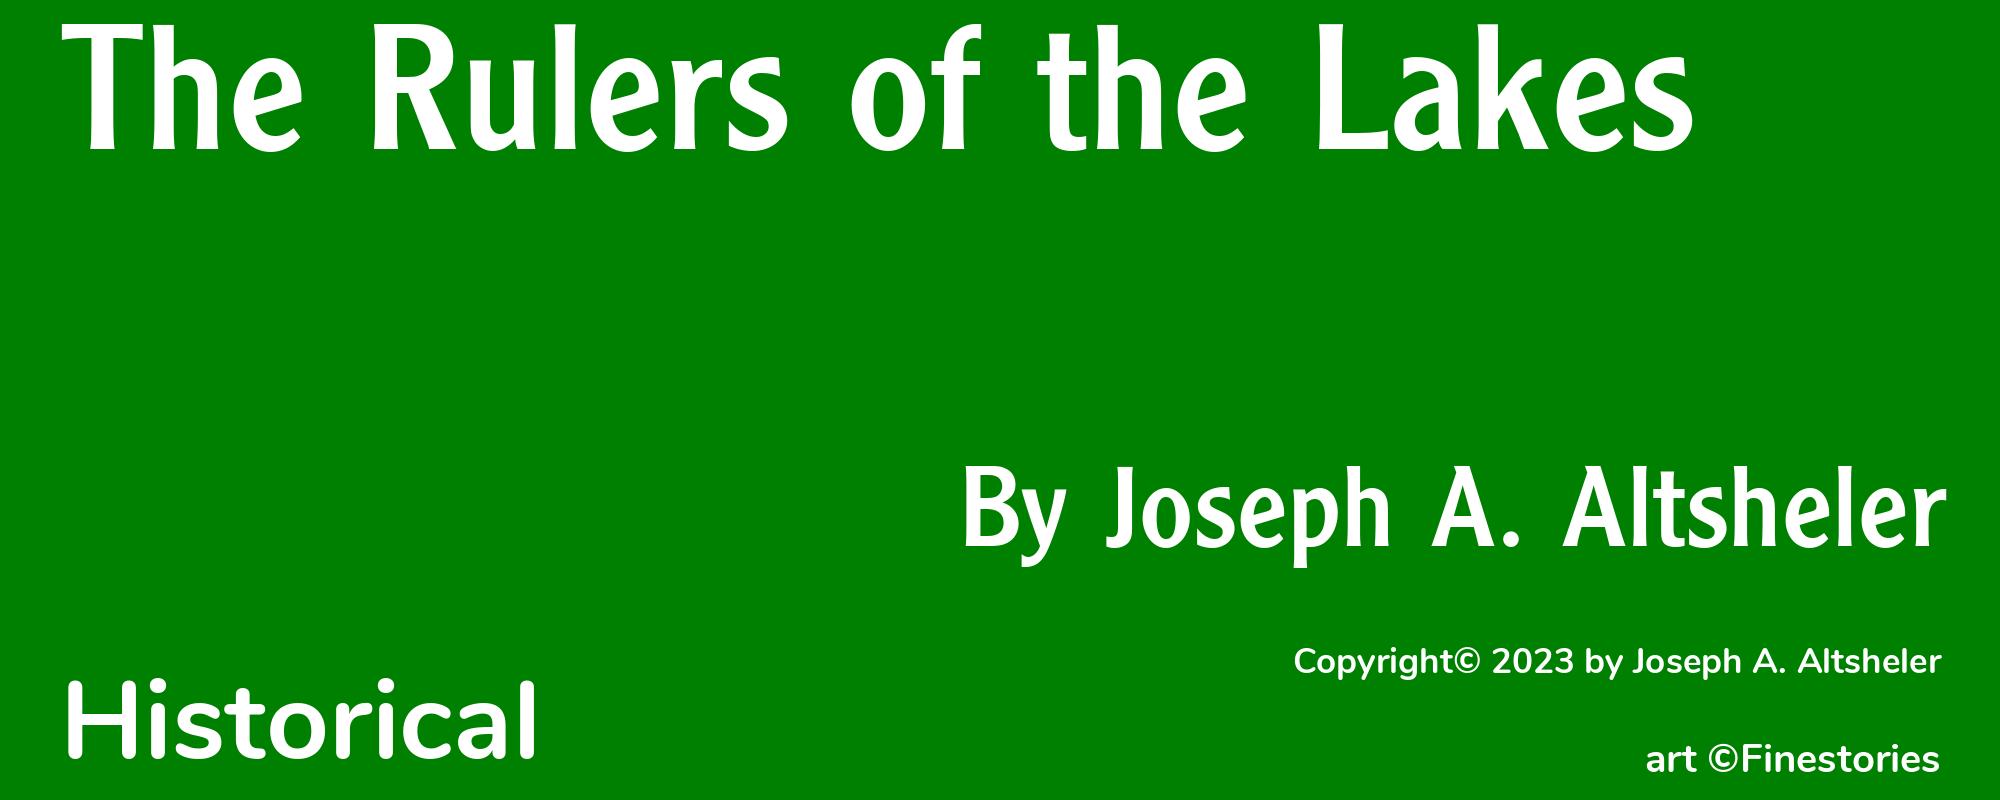 The Rulers of the Lakes - Cover